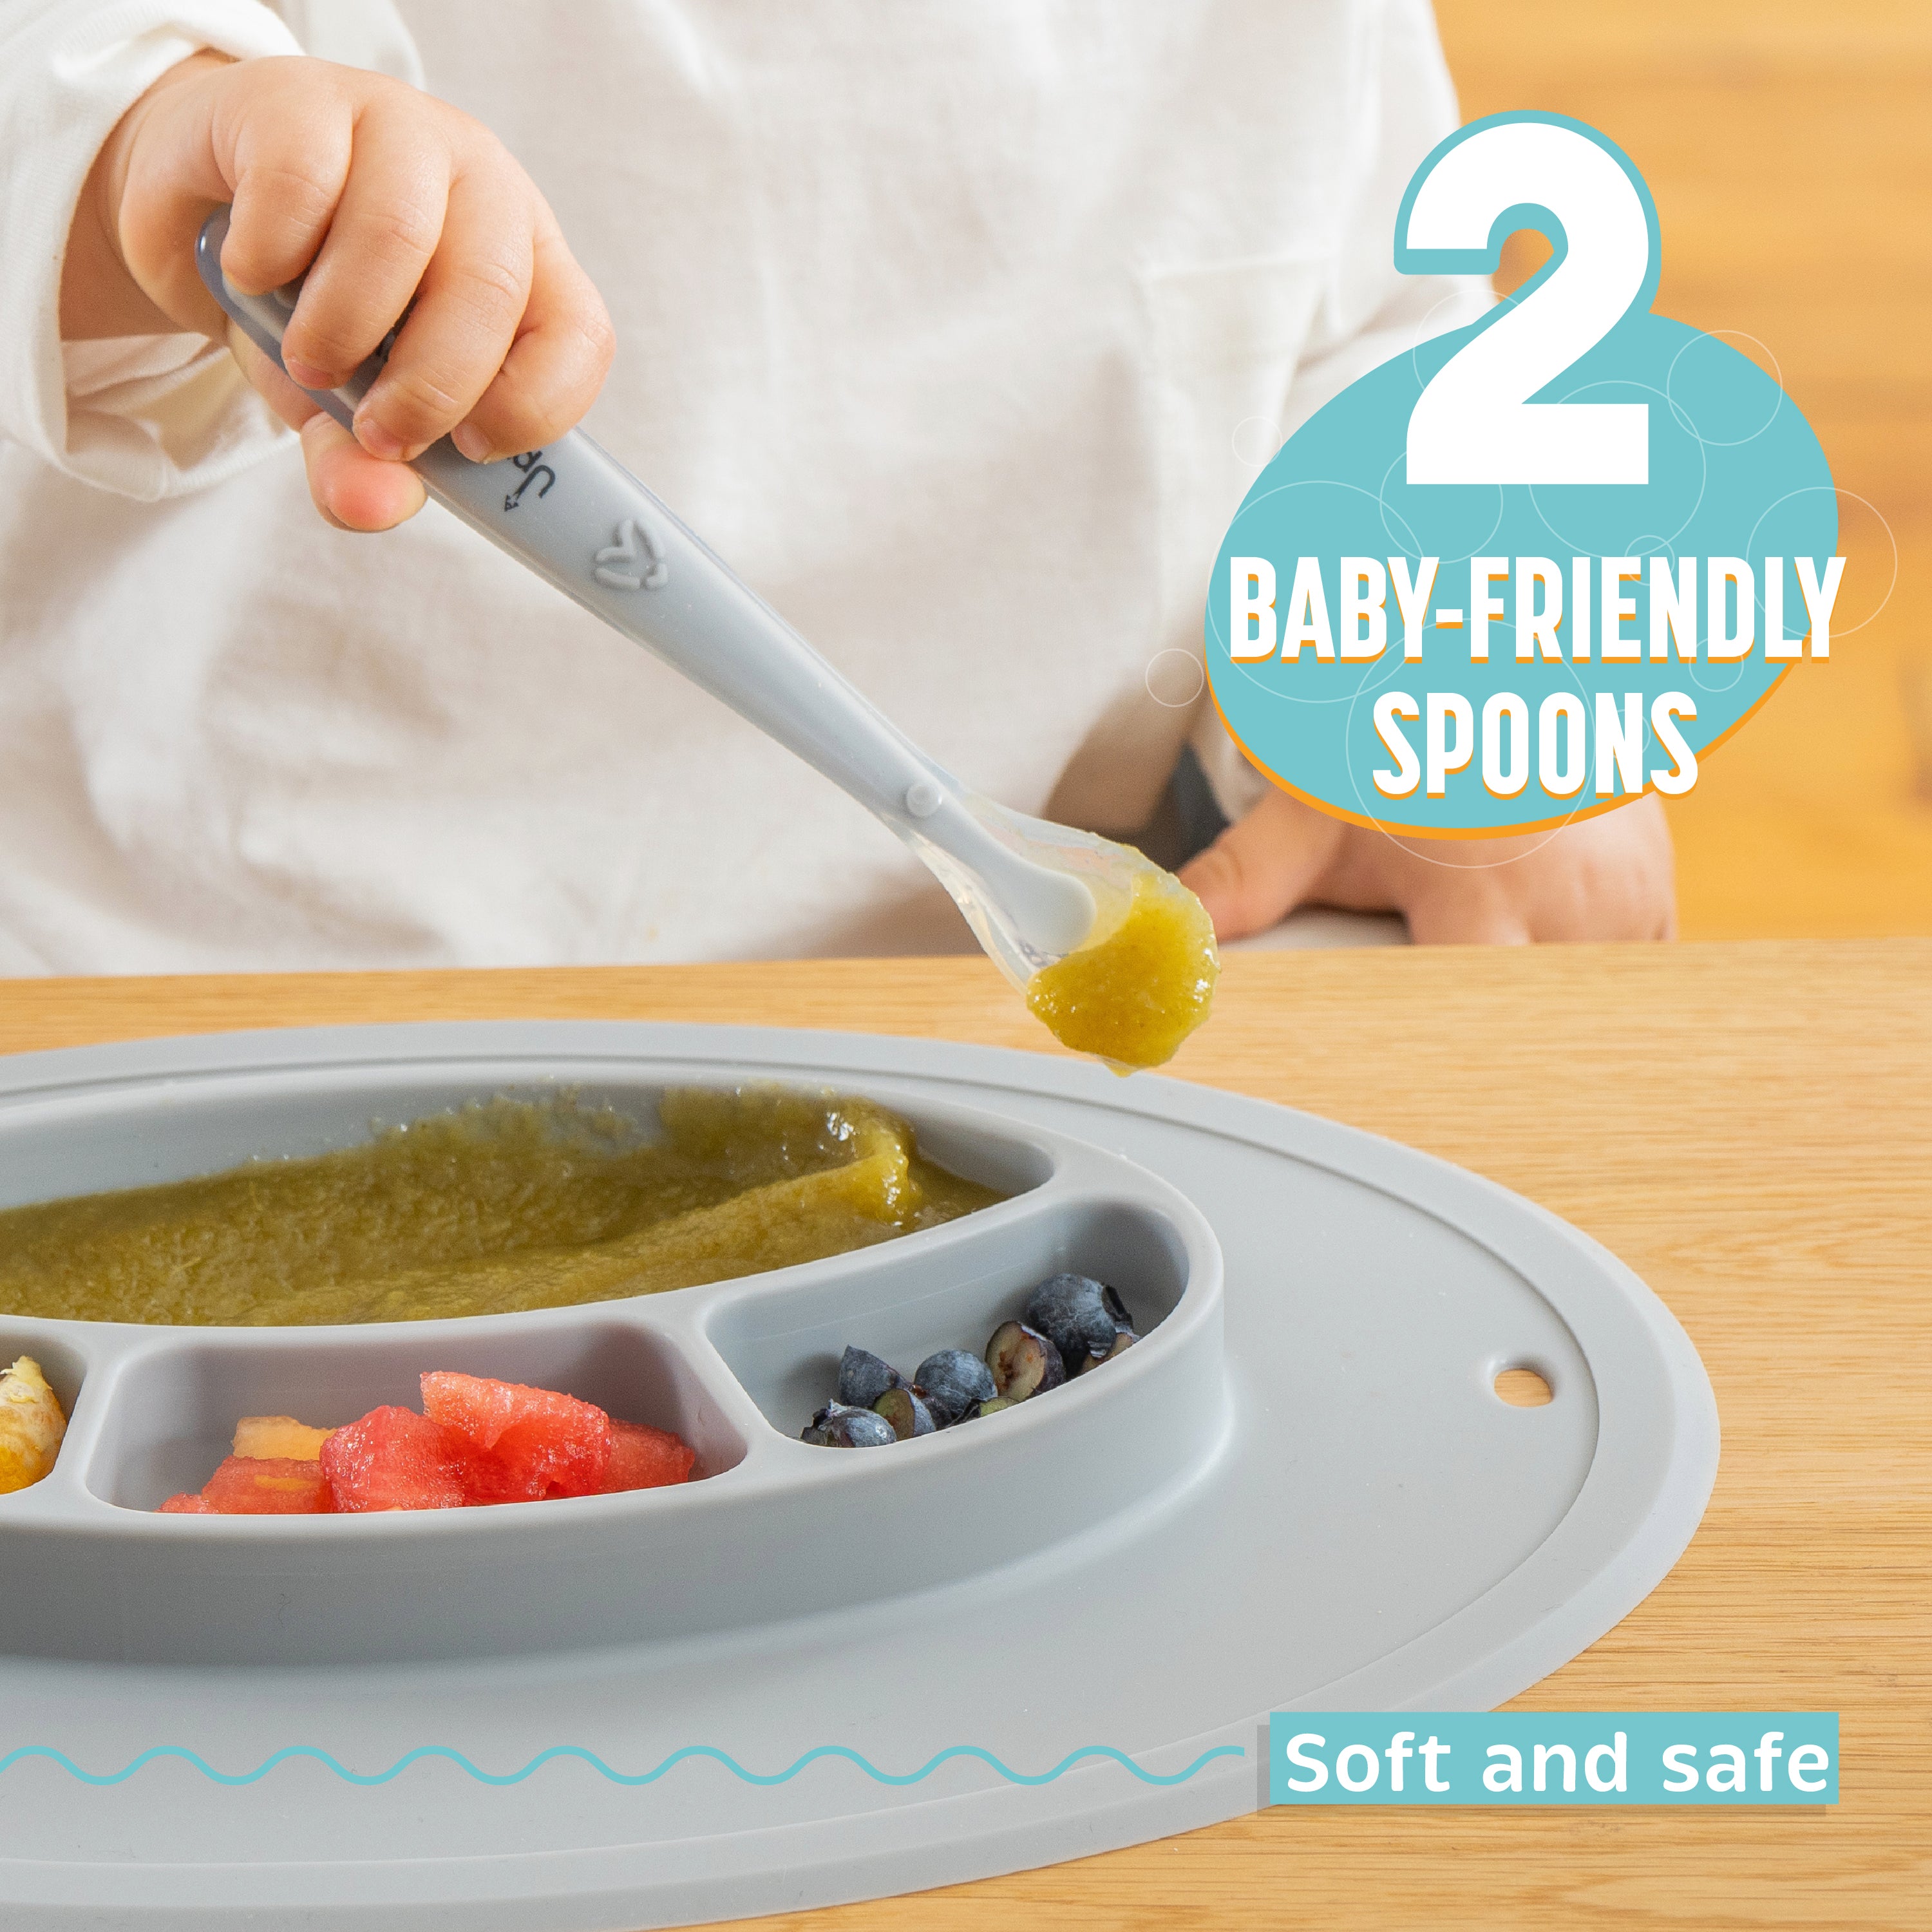 Upward Baby Plate And Bowl Placement Set Multi, one size - Kroger